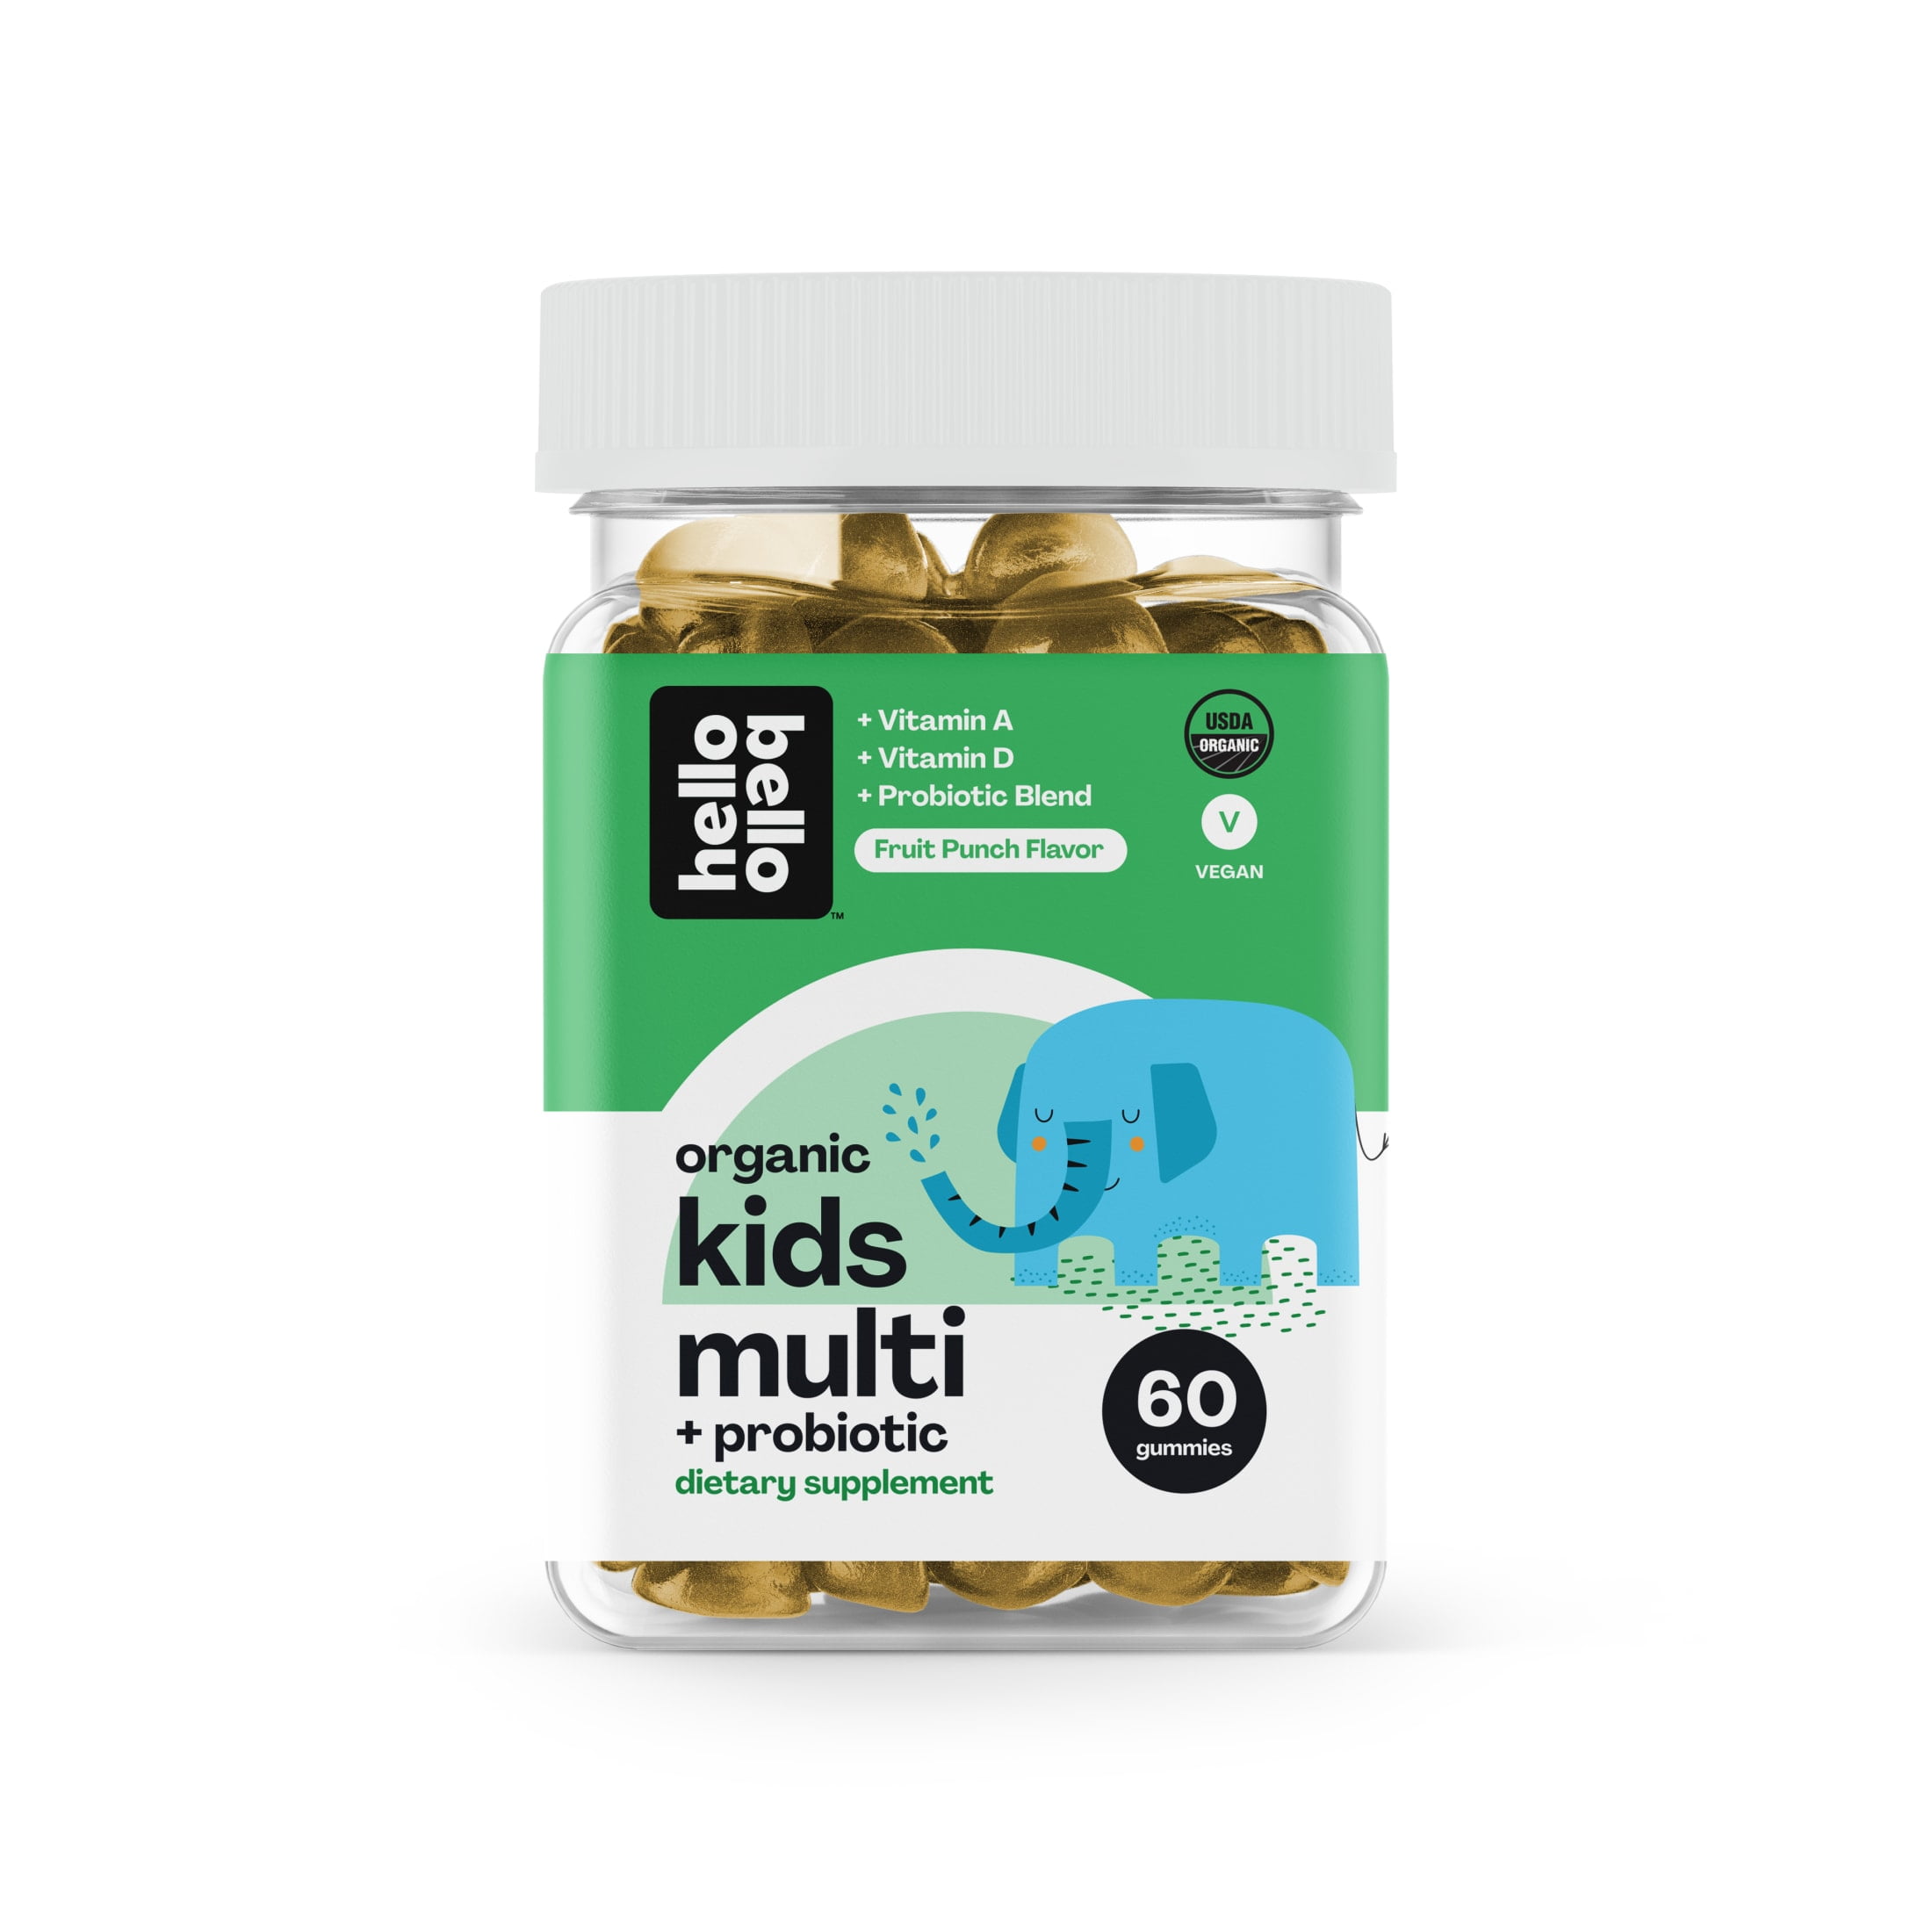 Hello Bello Kid's Multi Vitamin + Probiotics I Vegan, Certified Organic and nonGMO Natural Fruit Punch Flavor Gummies I Made with Vitamin A, Vitamin B6, Folate and B12 I 60 Count